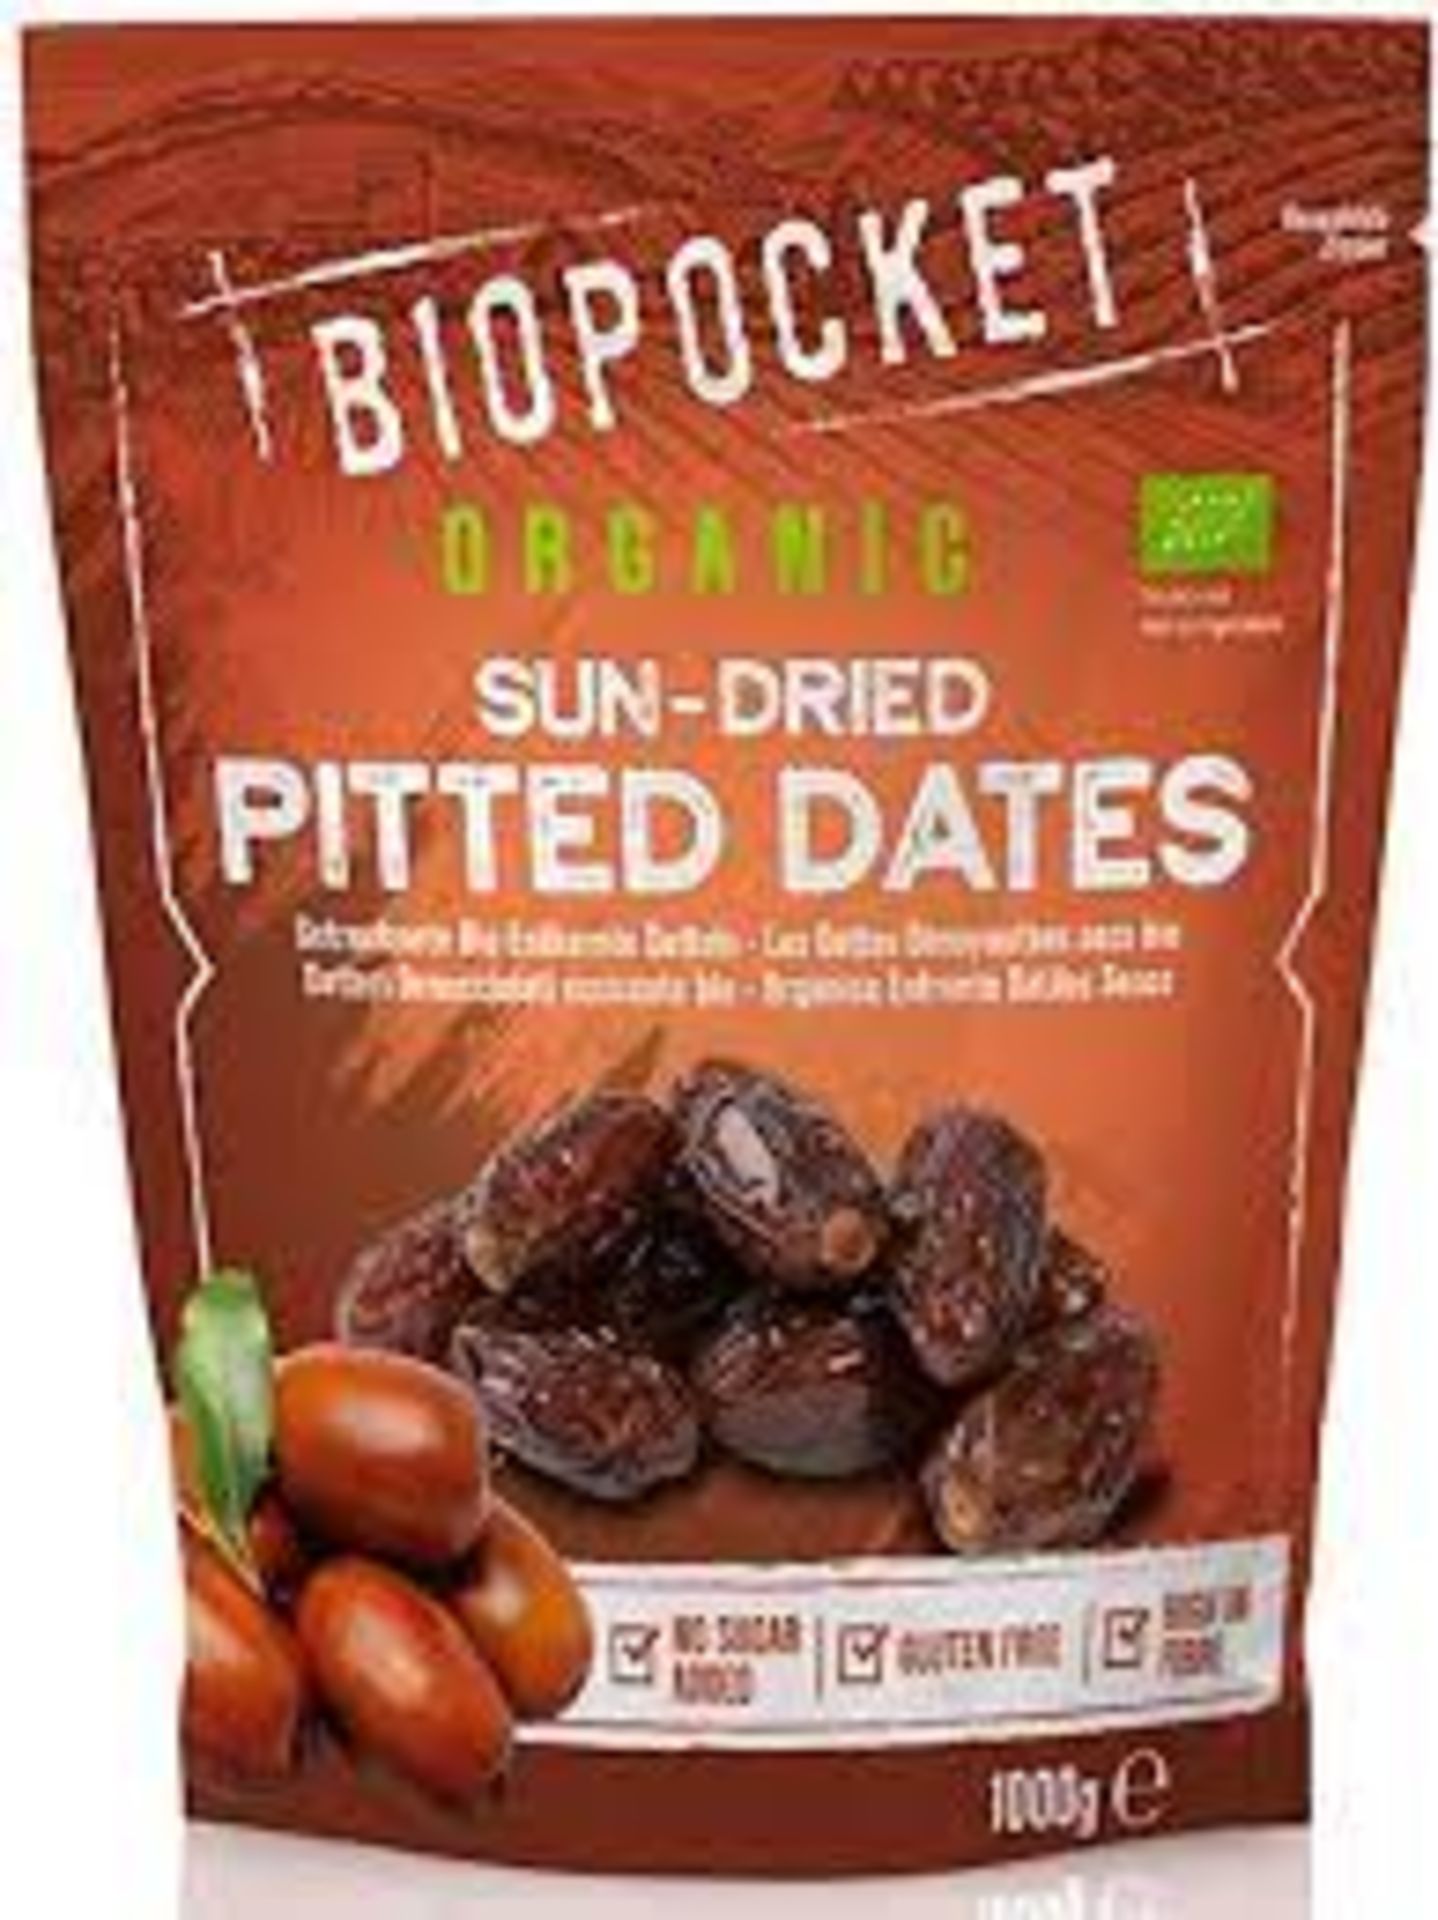 RRP £1572 (Approx. Count 96) spW33i6631H 90 x Biopocket Organic Dried Pitted Dates, 1000 g BBE 23/